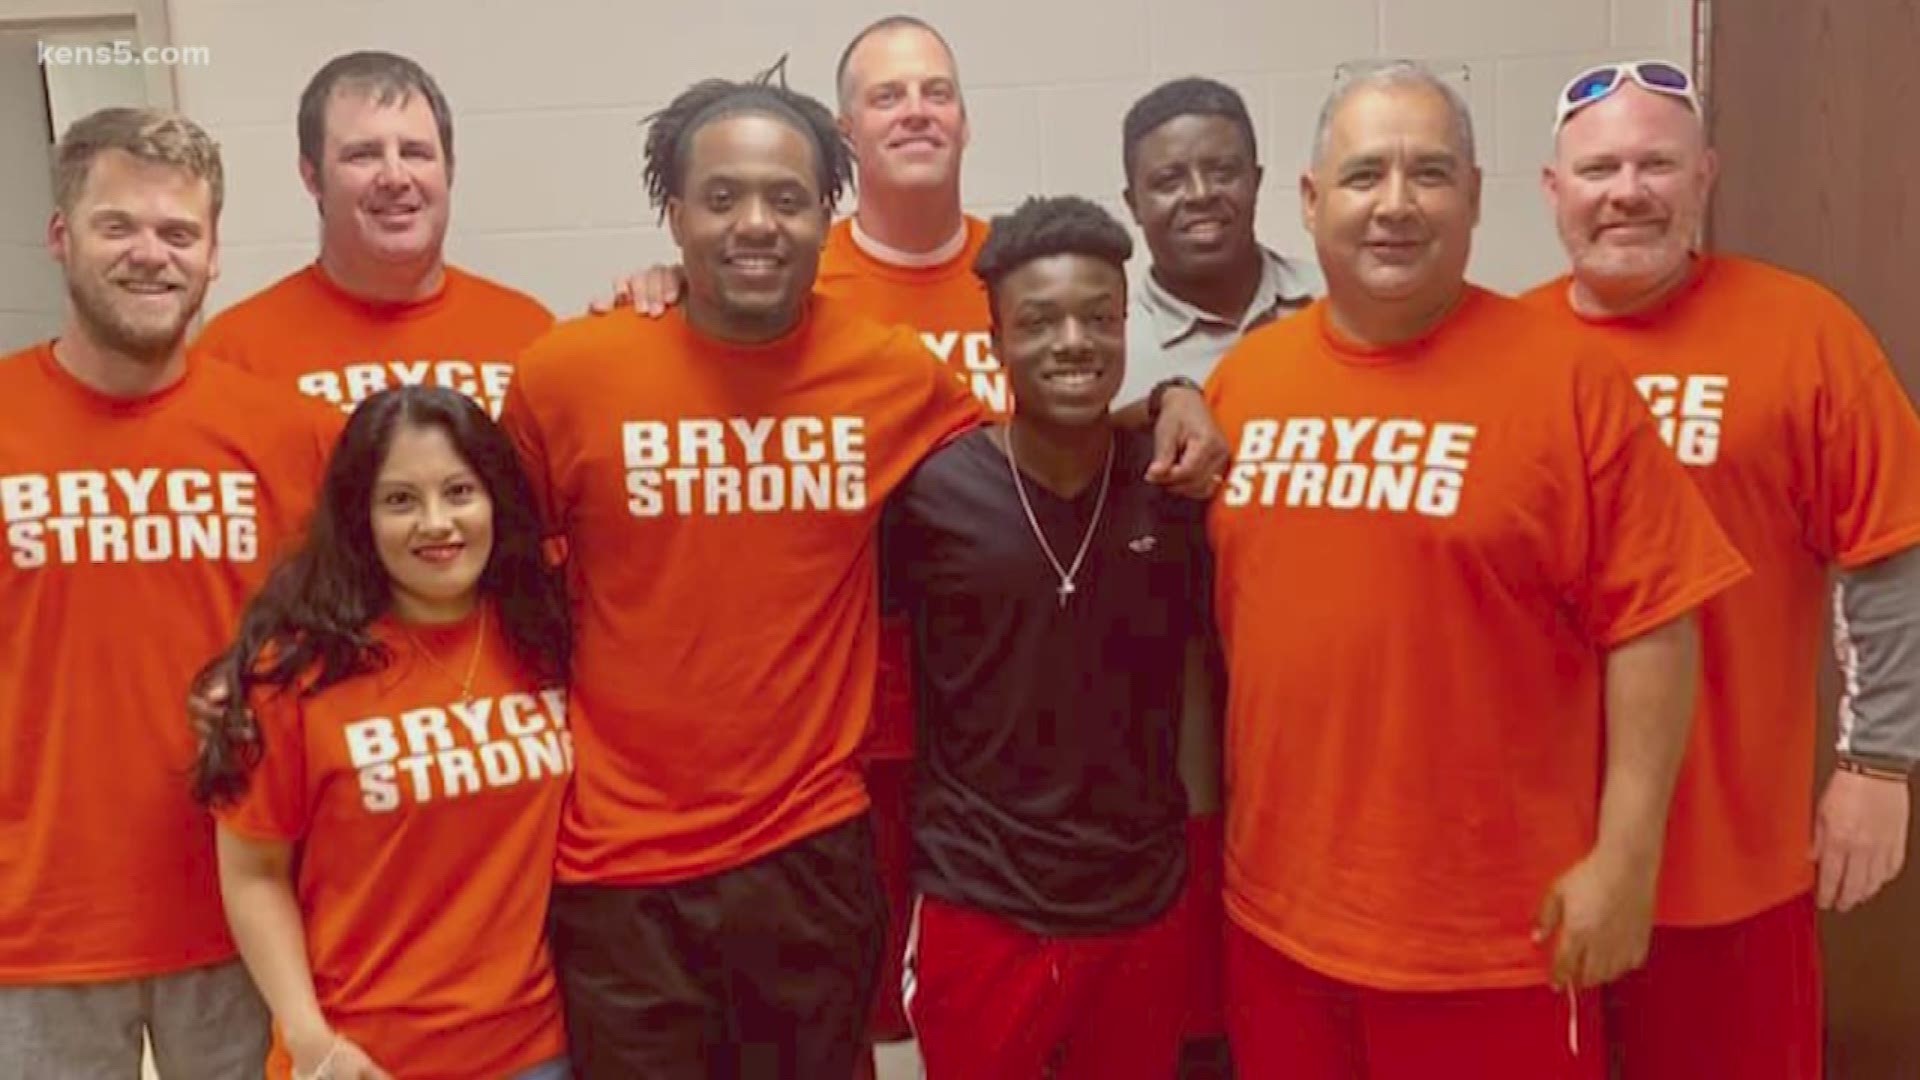 This quiet warrior reveals what it means to be #BryceStrong.